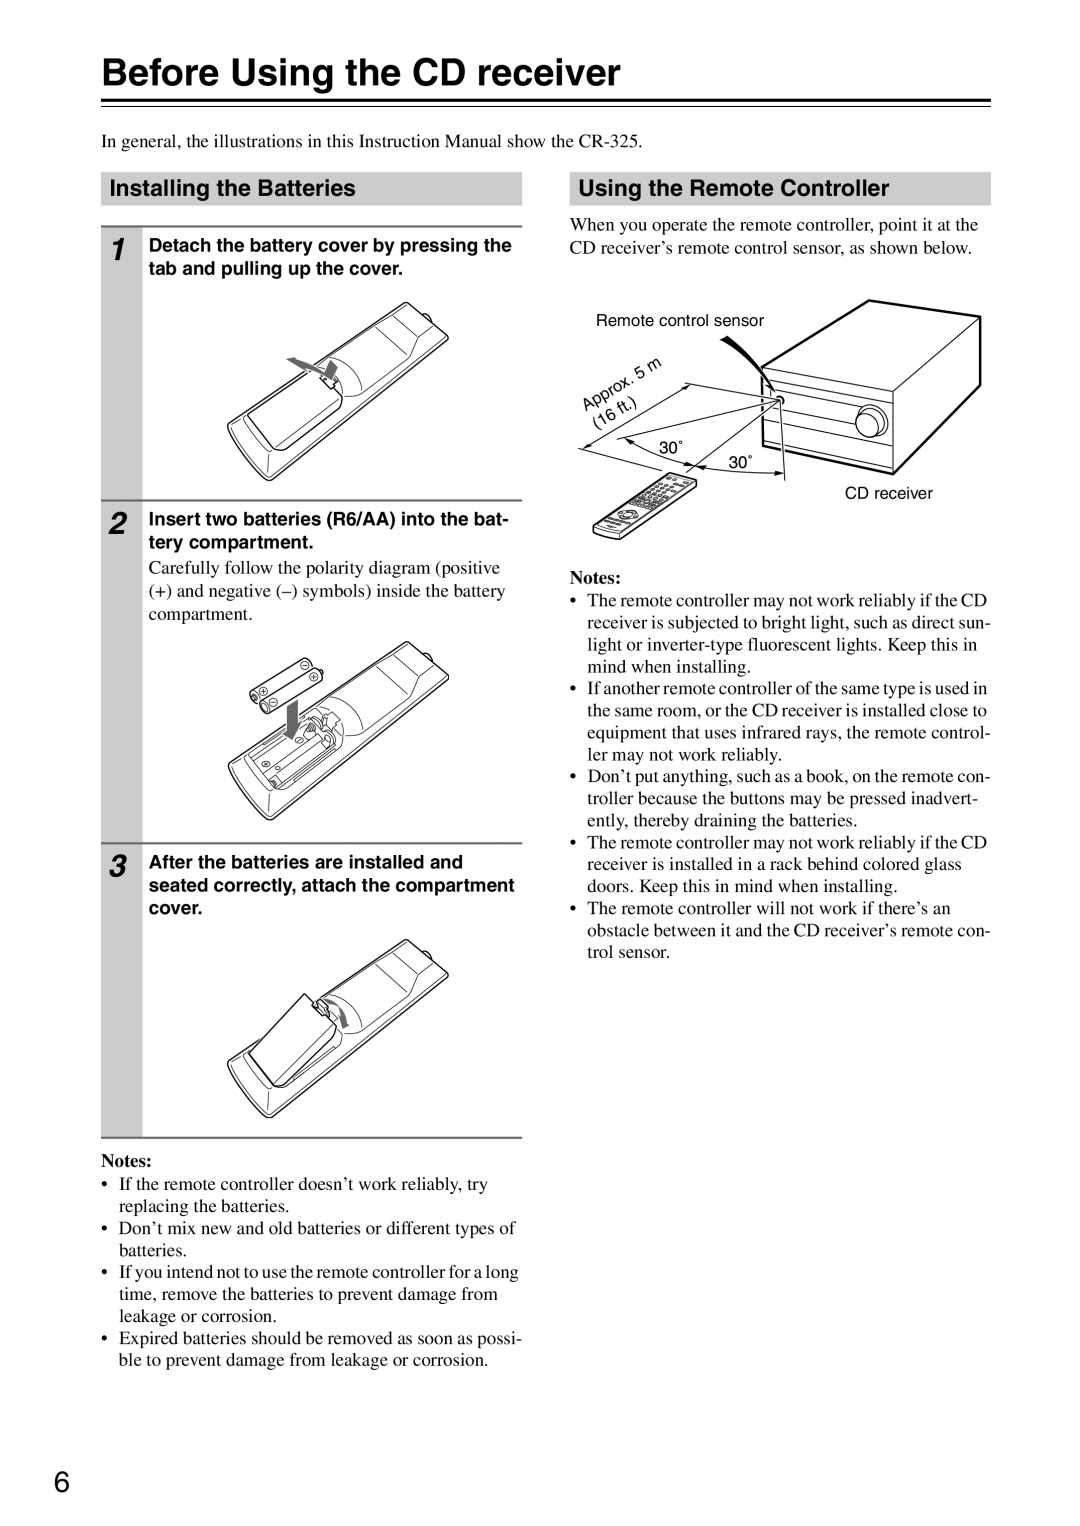 Onkyo CR-325, CR-525 instruction manual Before Using the CD receiver, Installing the Batteries, Using the Remote Controller 